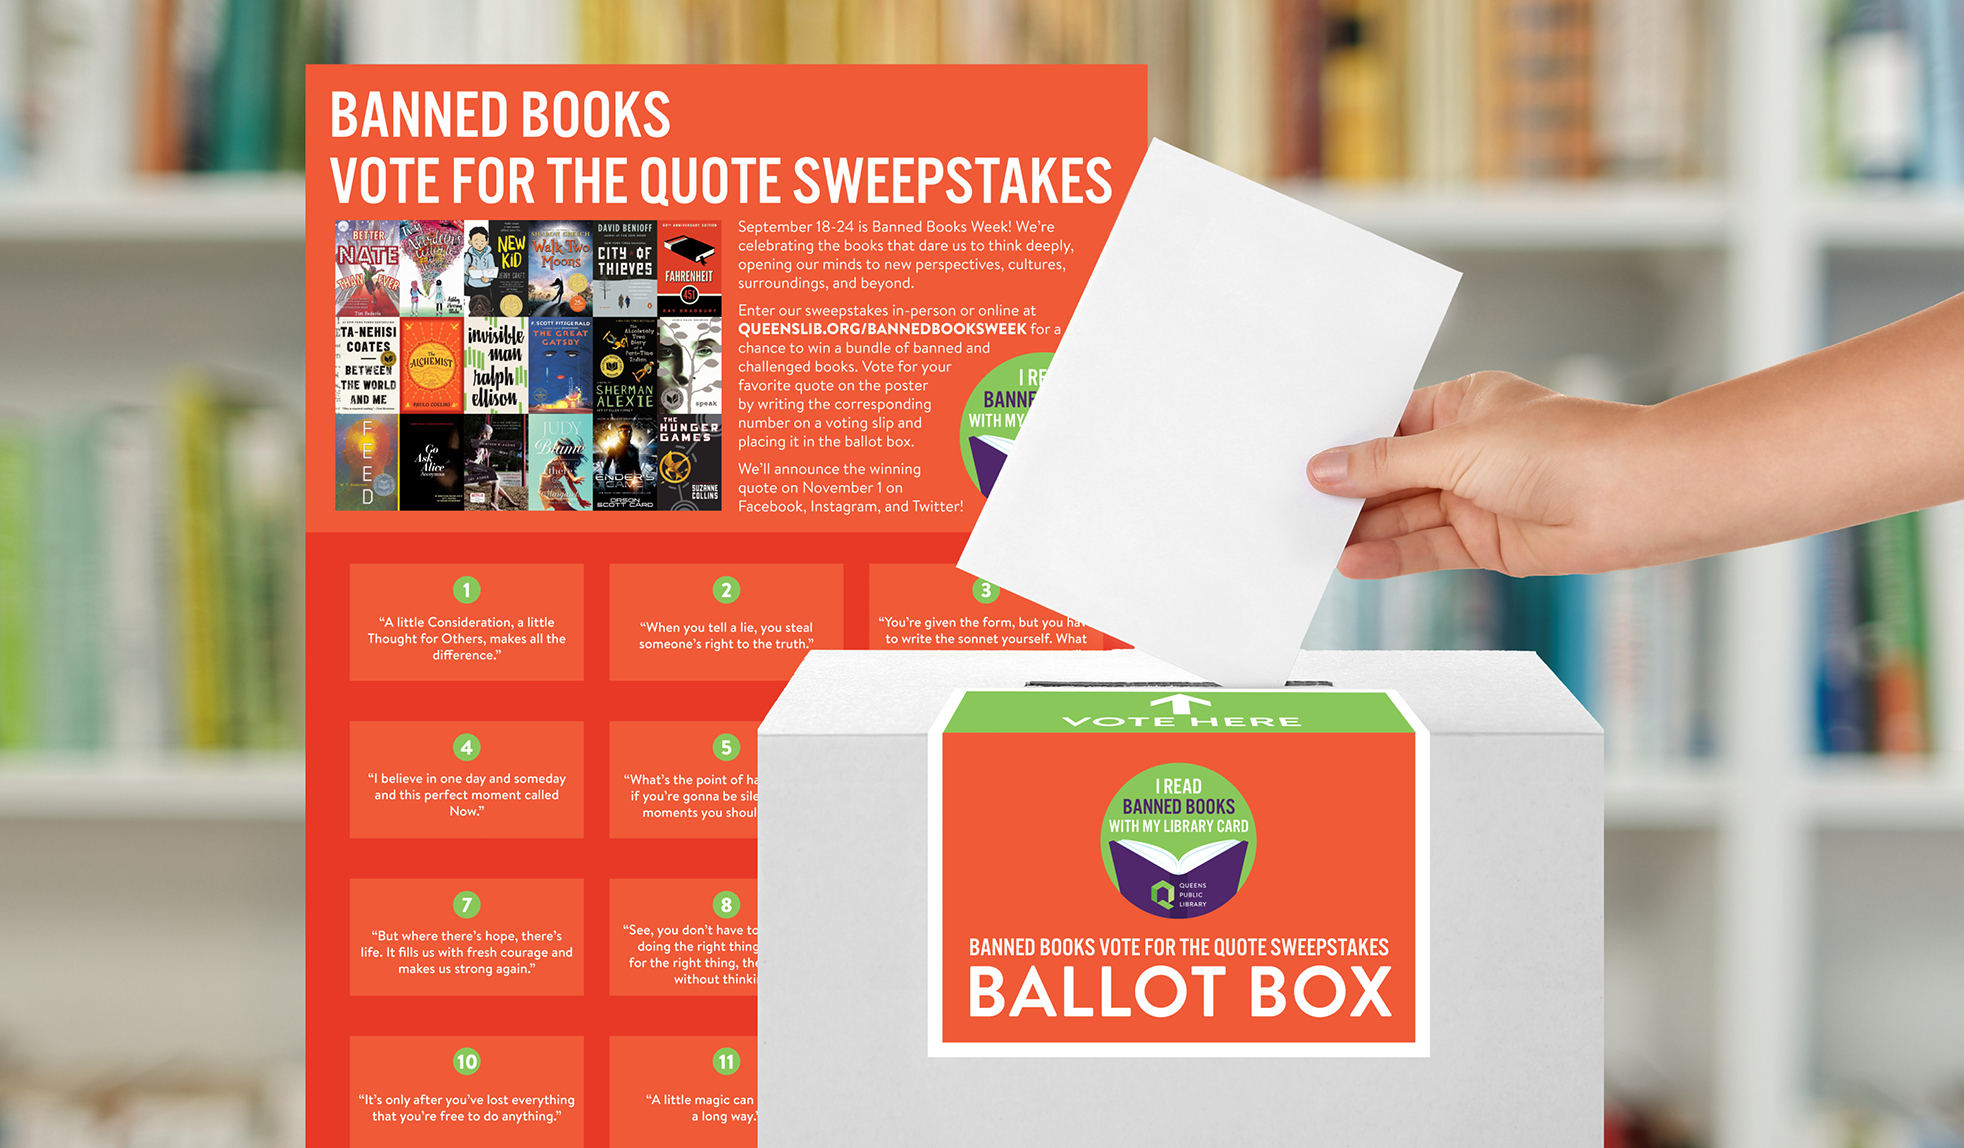 In honor of Banned Books Week, enter our sweepstakes online or in person at your local library!